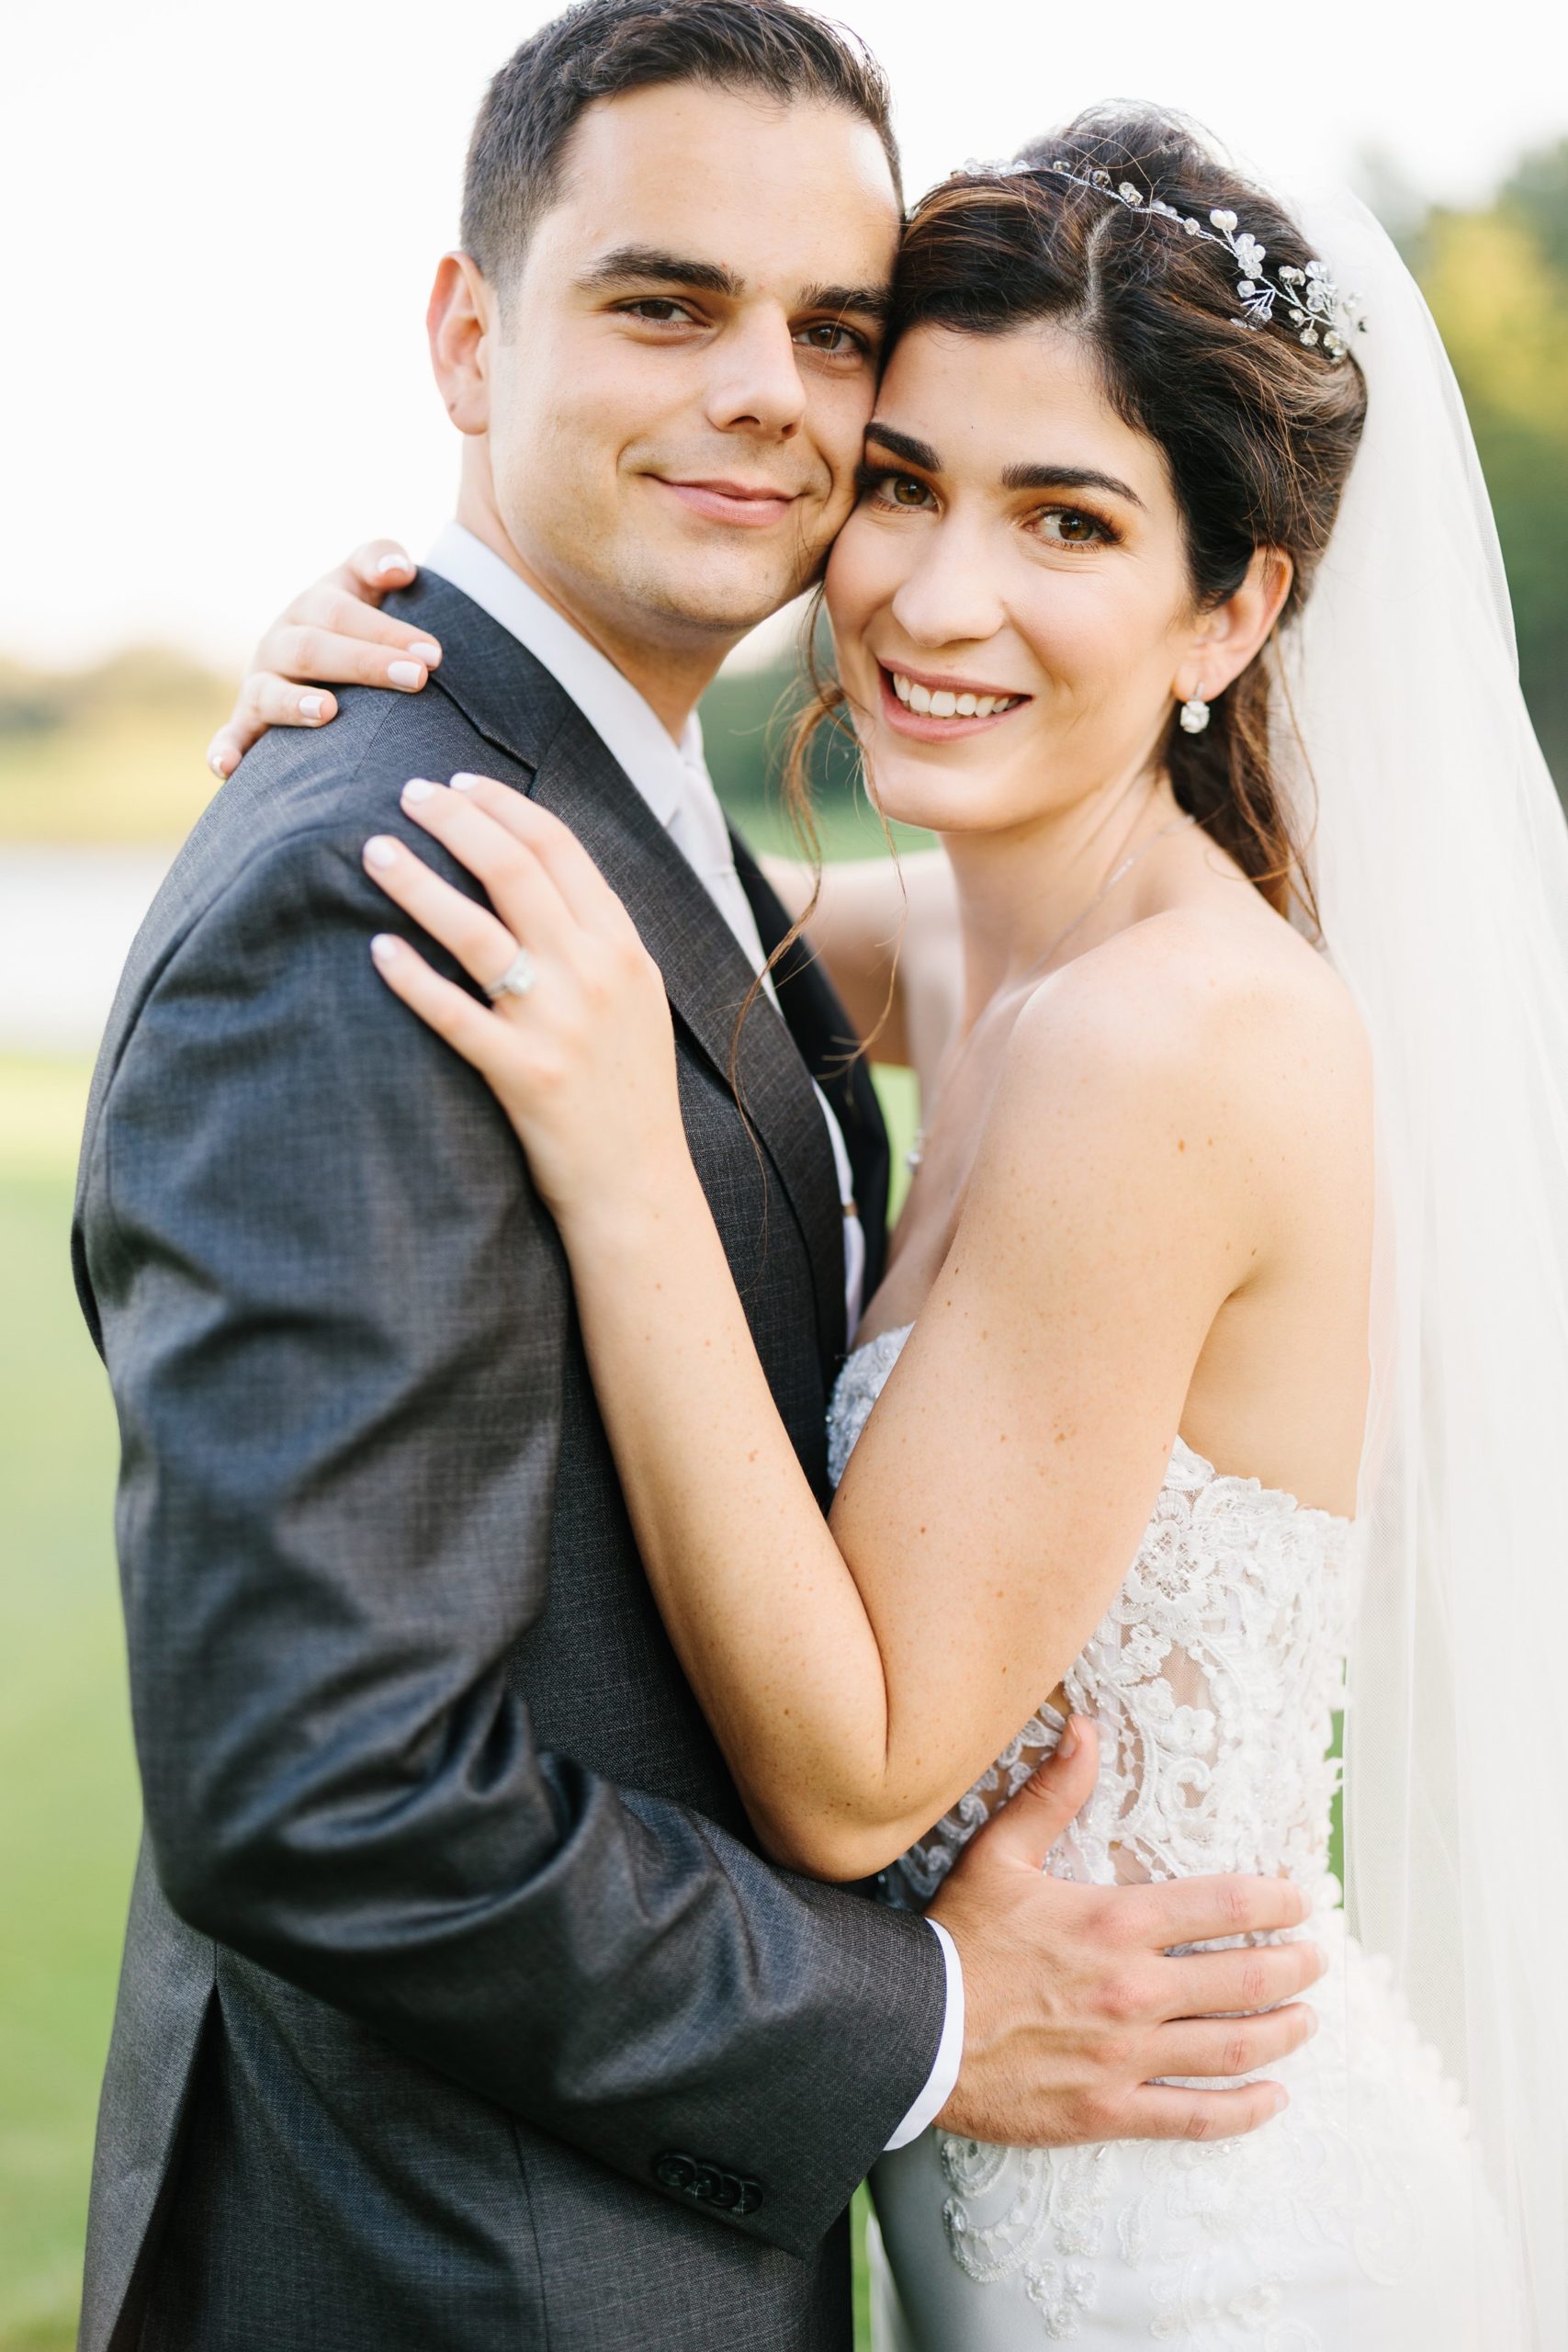 Bride and groom take close up portrait, smiling for camera by Detroit Wedding Photographer Michele Maloney